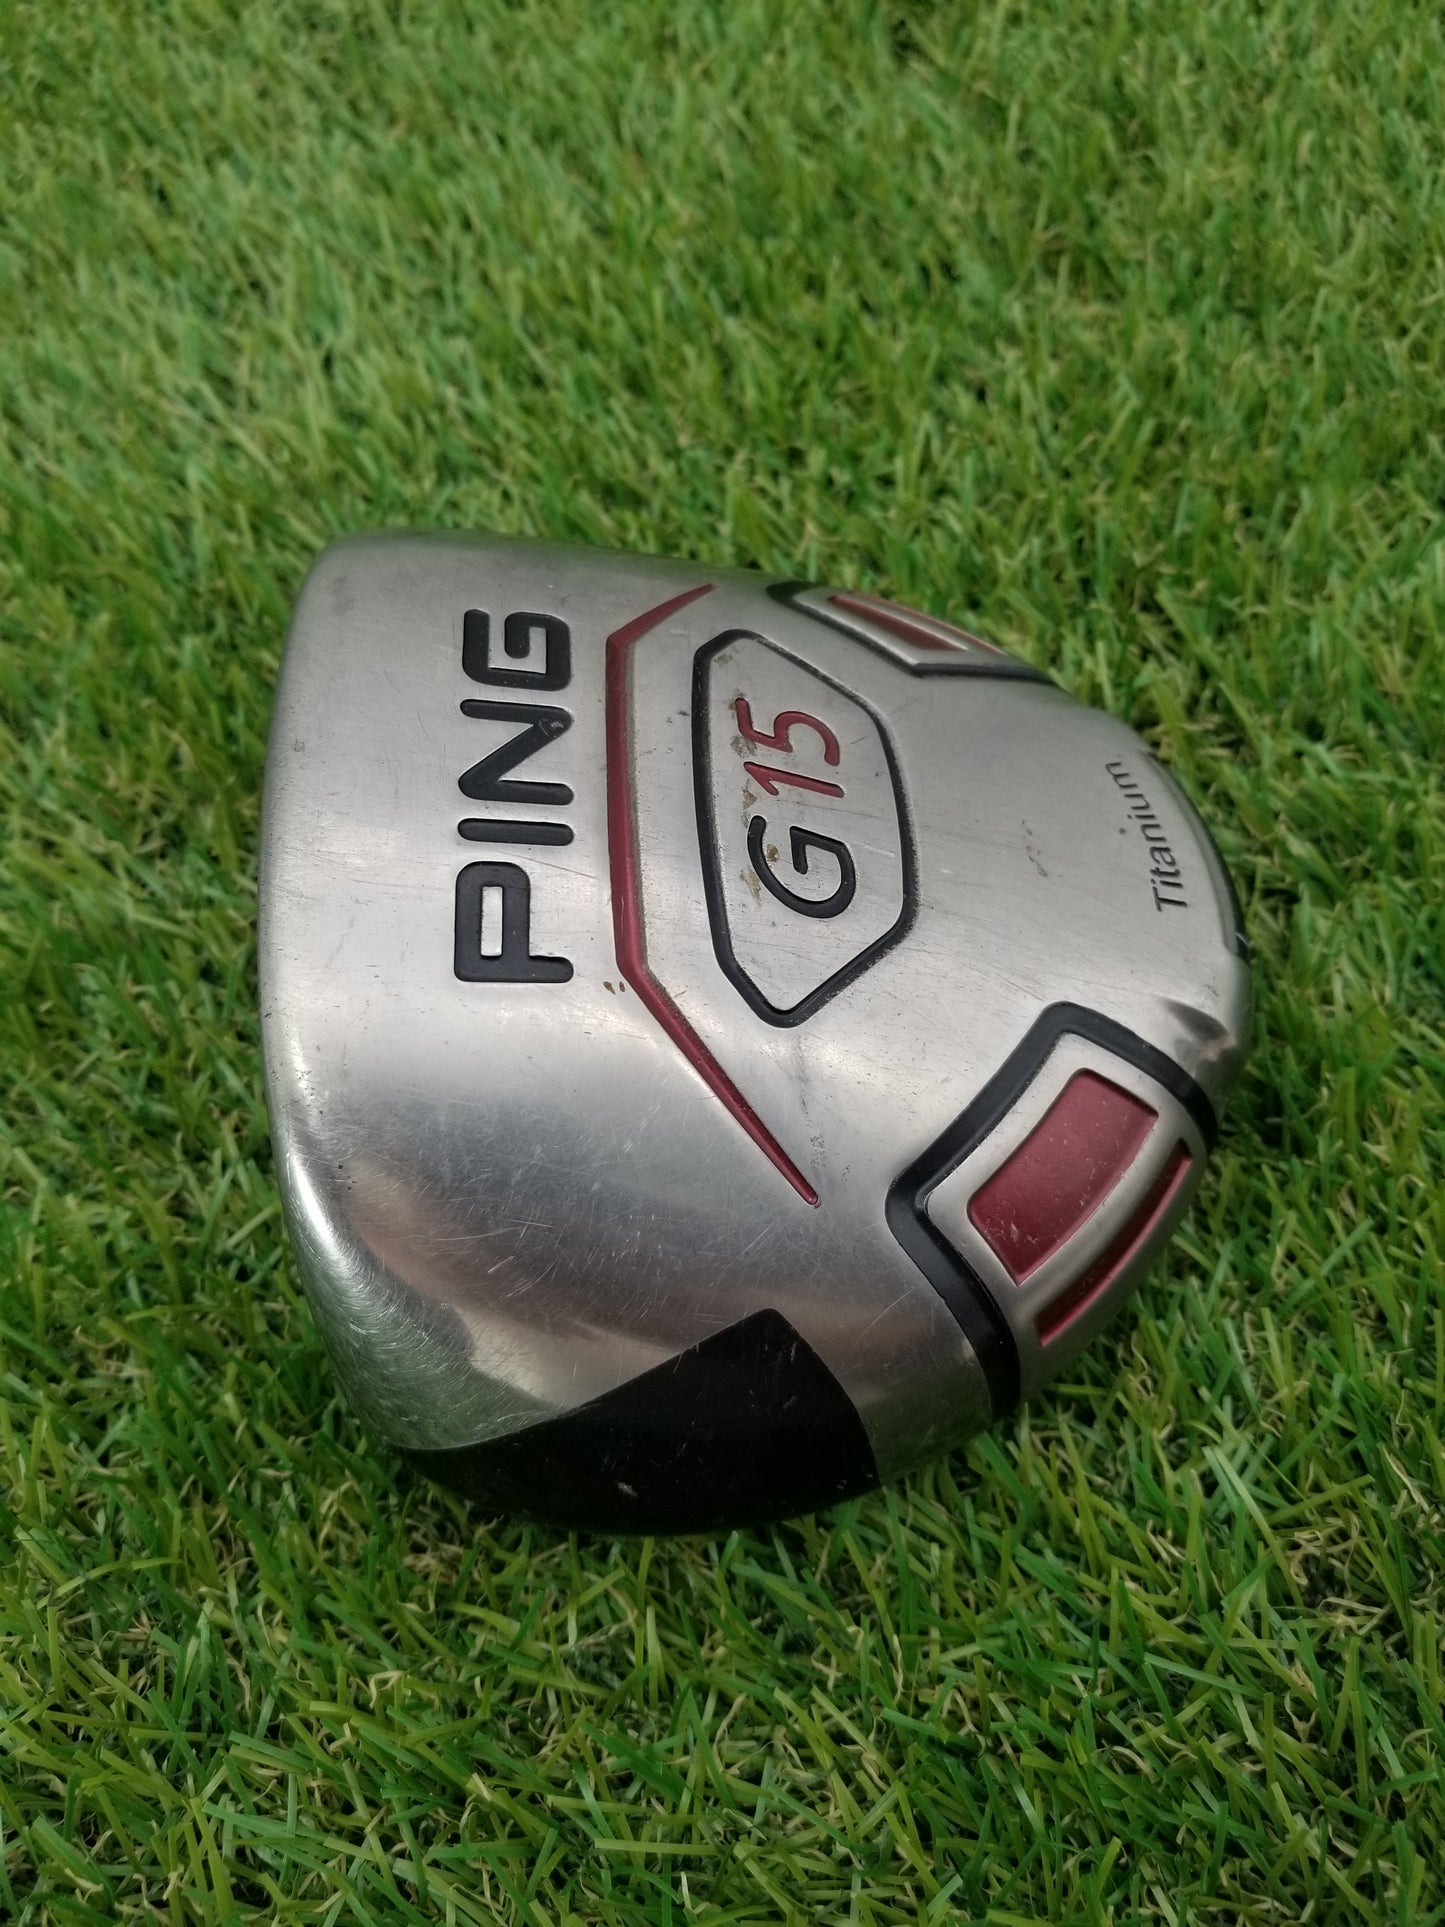 PING G15 DRIVER HEAD 9* CLUBHEAD POOR